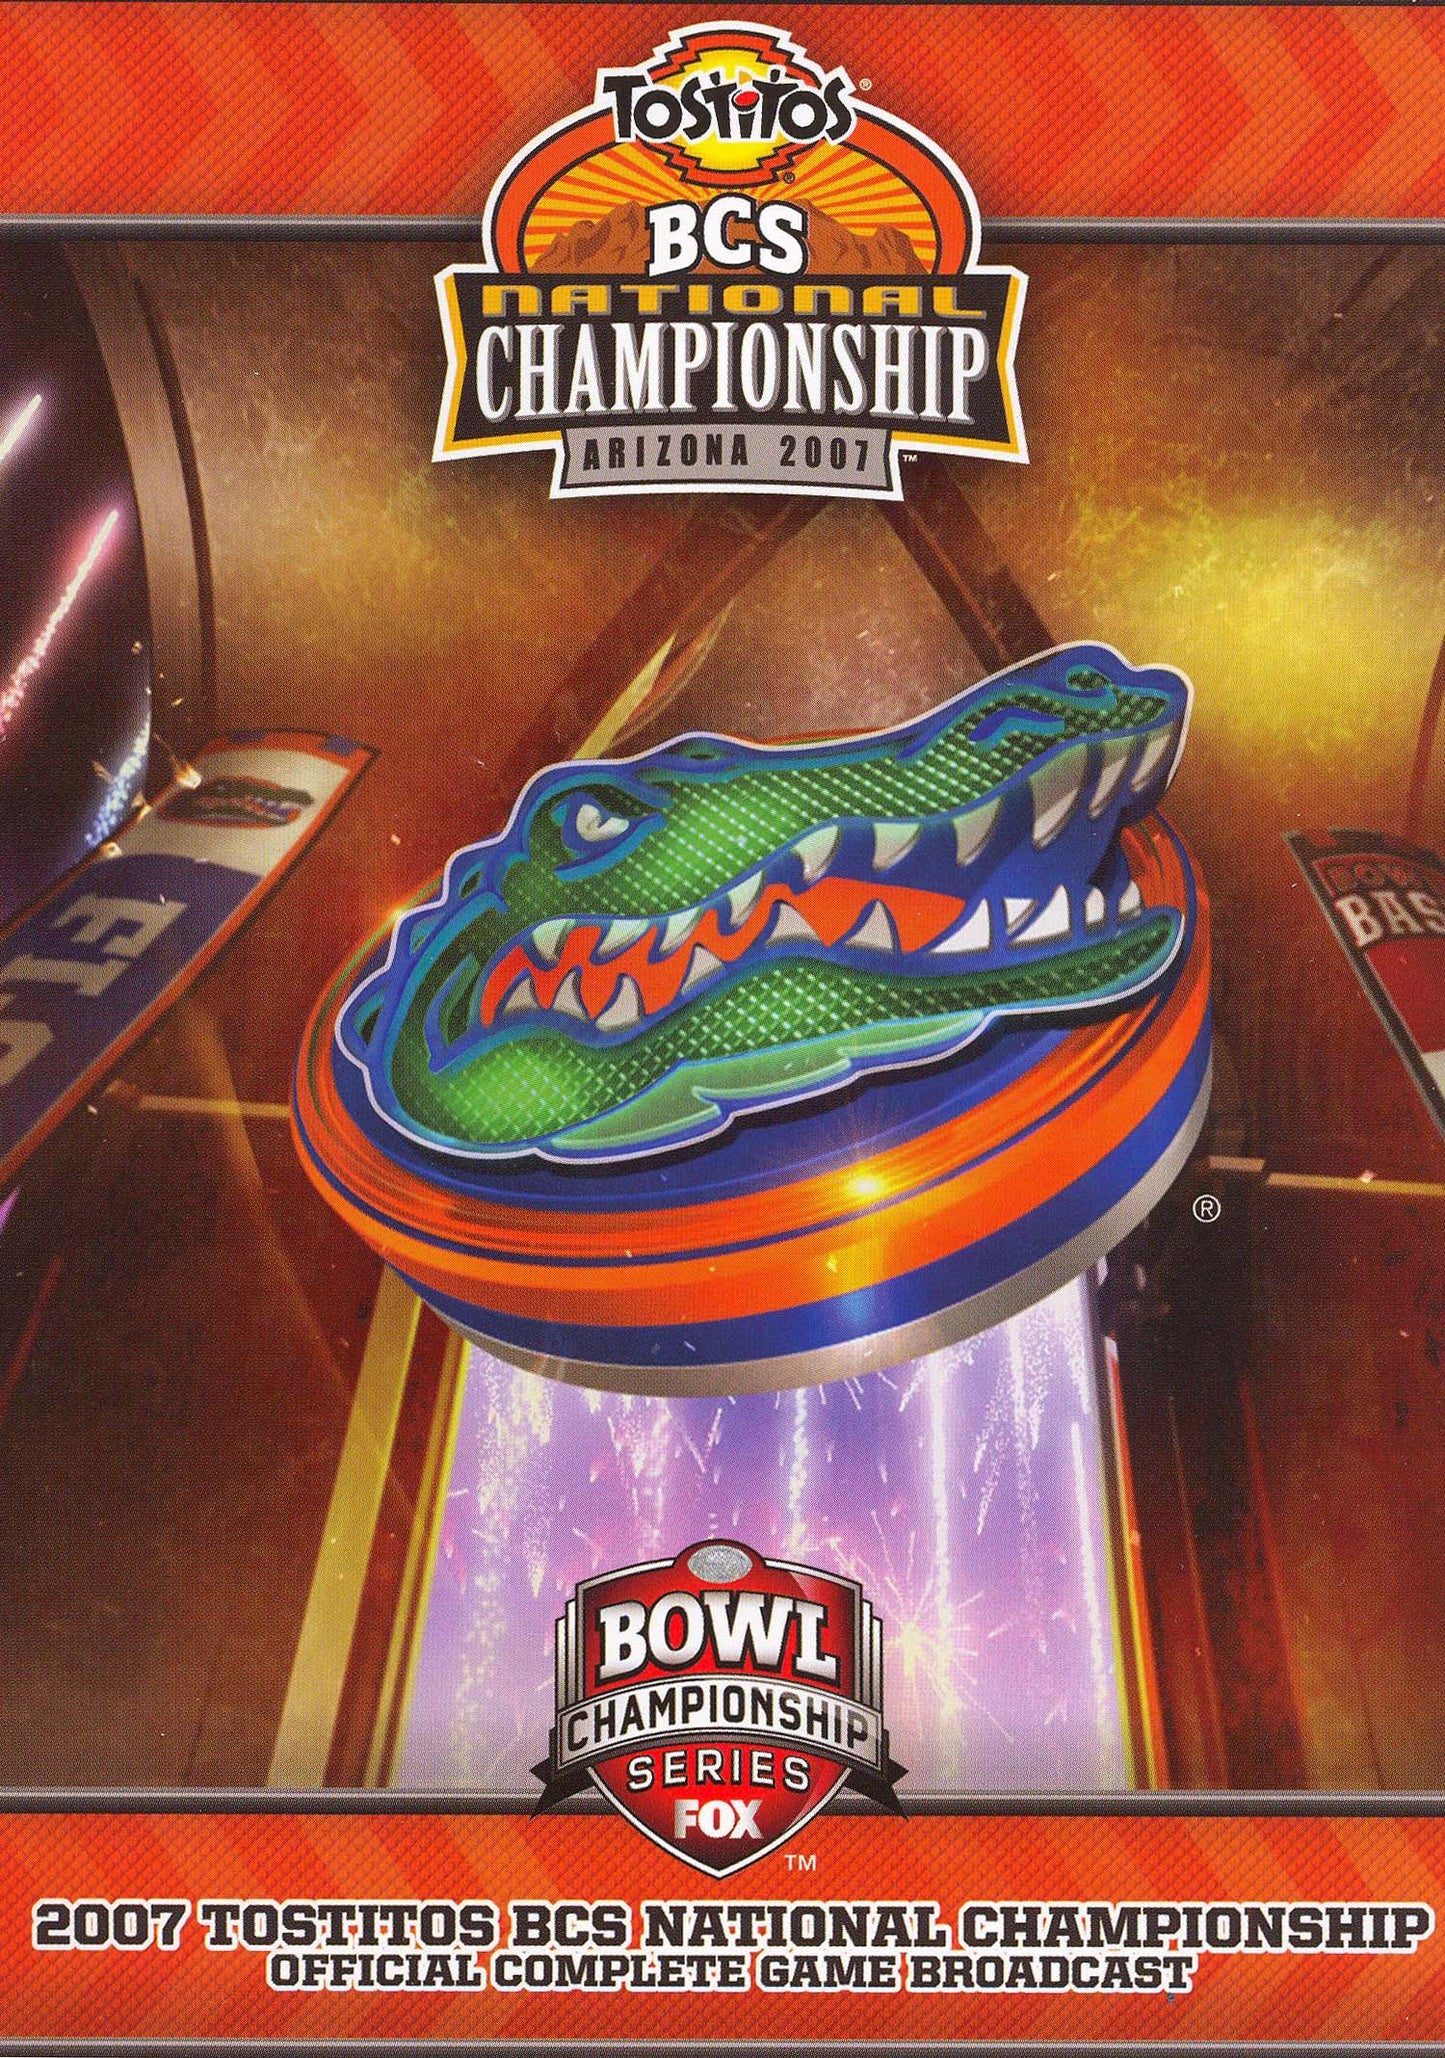 2007 BCS National Championship Official Complete Game Broadcast cover art